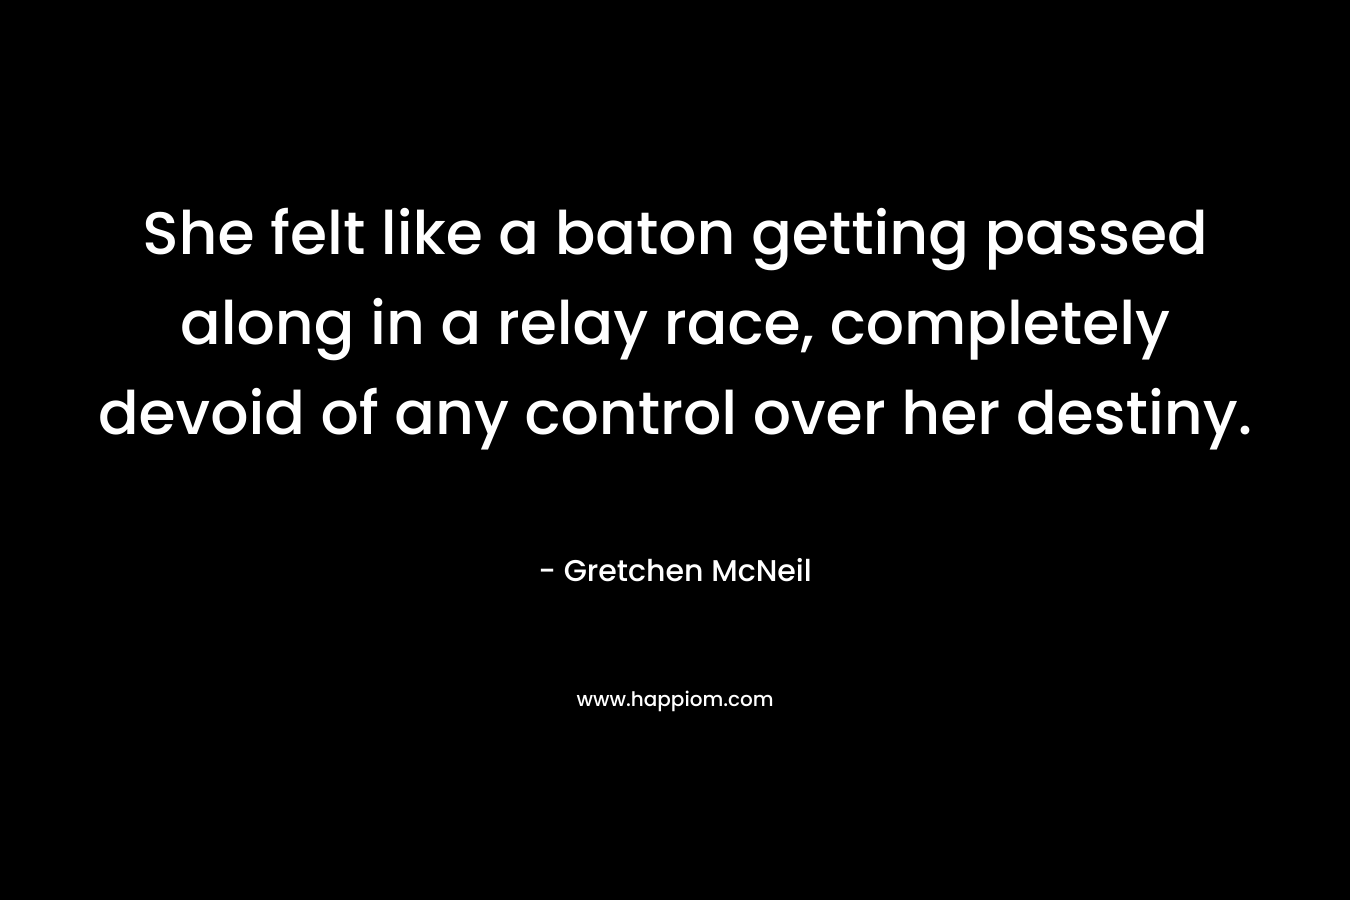 She felt like a baton getting passed along in a relay race, completely devoid of any control over her destiny.